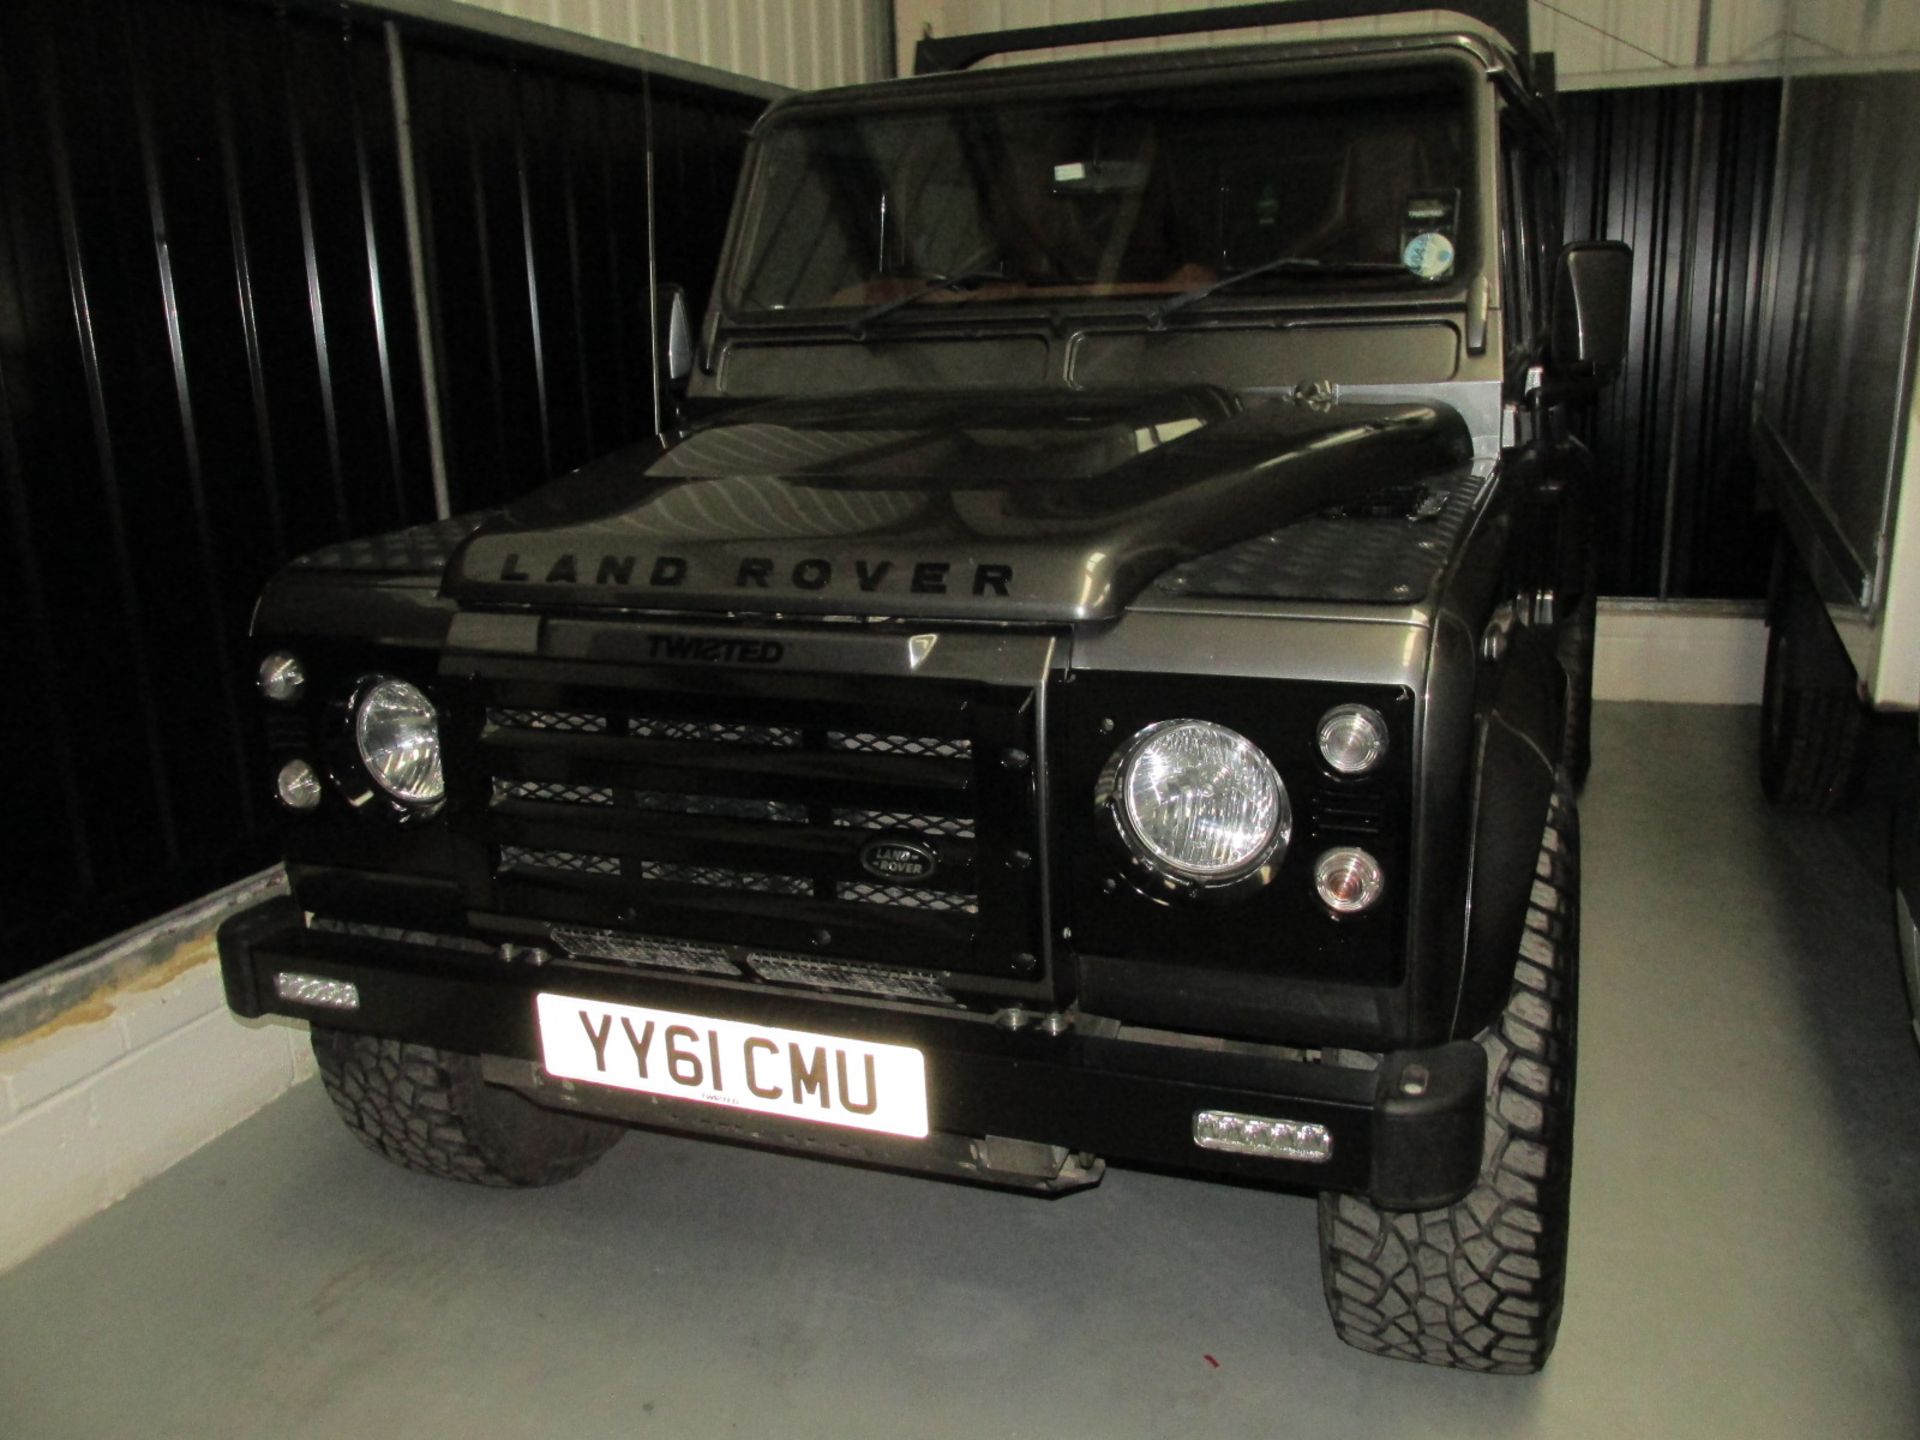 'TWISTED' - Rare Land Rover Defender Genuine PS 10 Built by Twisted Yorkshire - Image 14 of 50